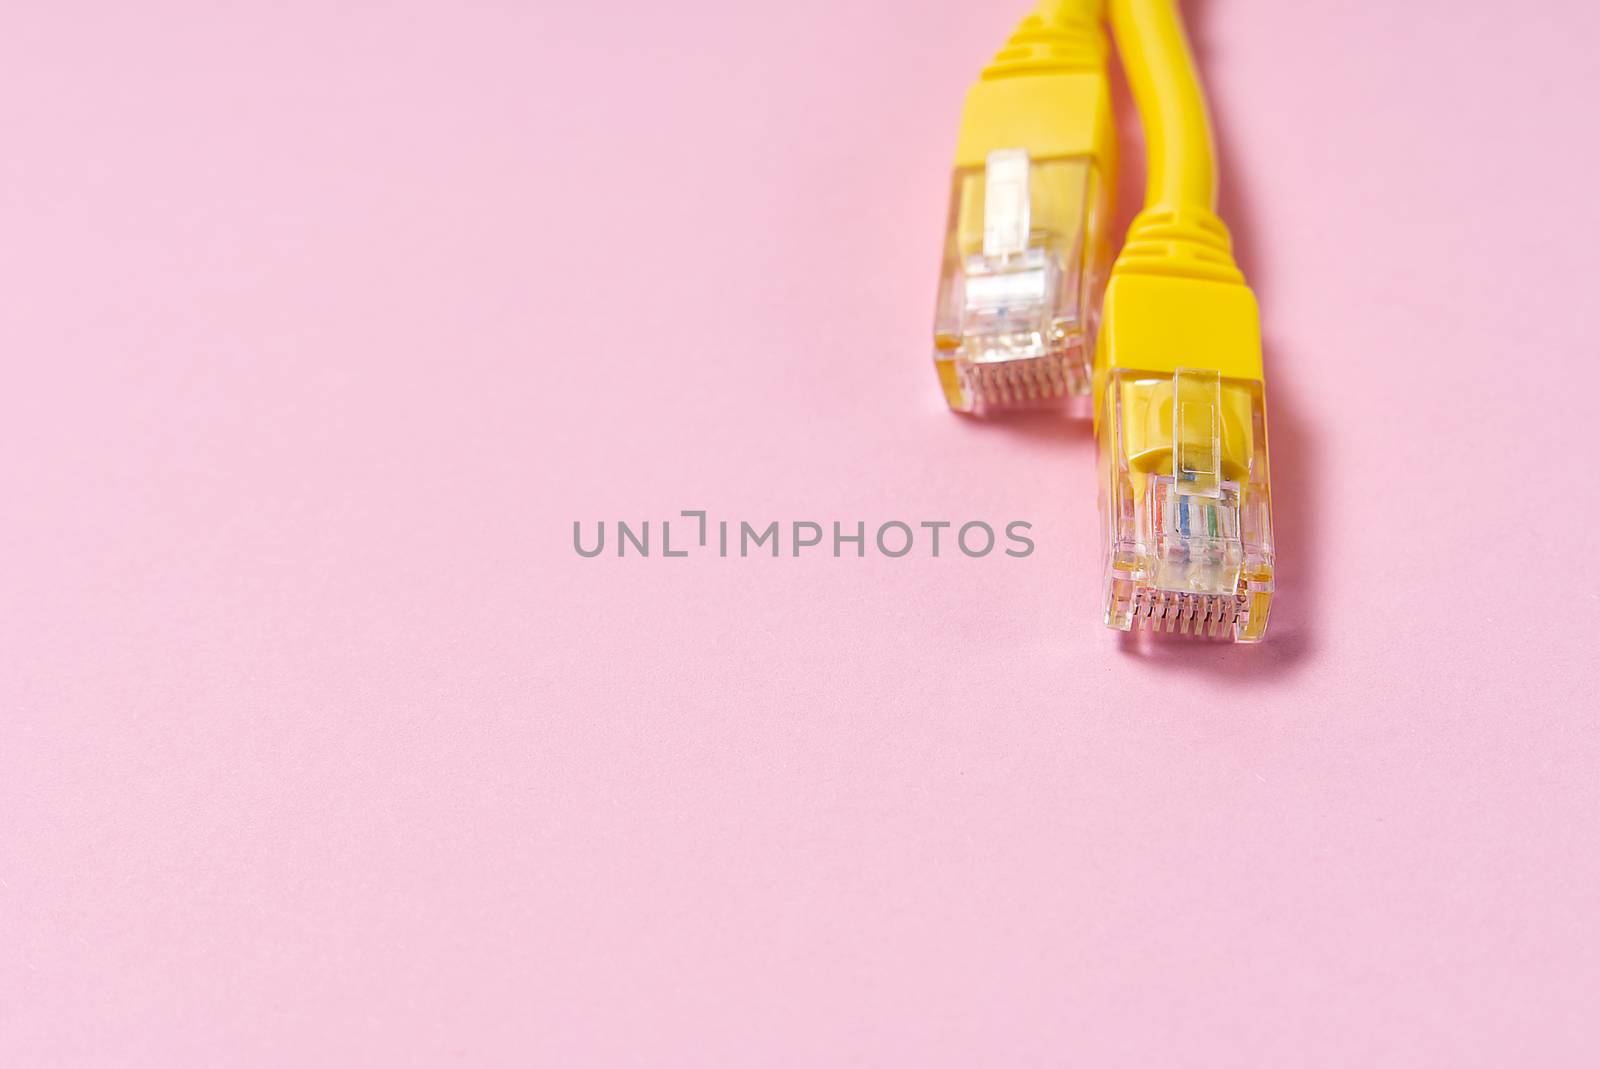 internet wire cat6 cat5. the concept of connecting to an Internet network or providing construction, repair, and high-speed Internet services. by PhotoTime